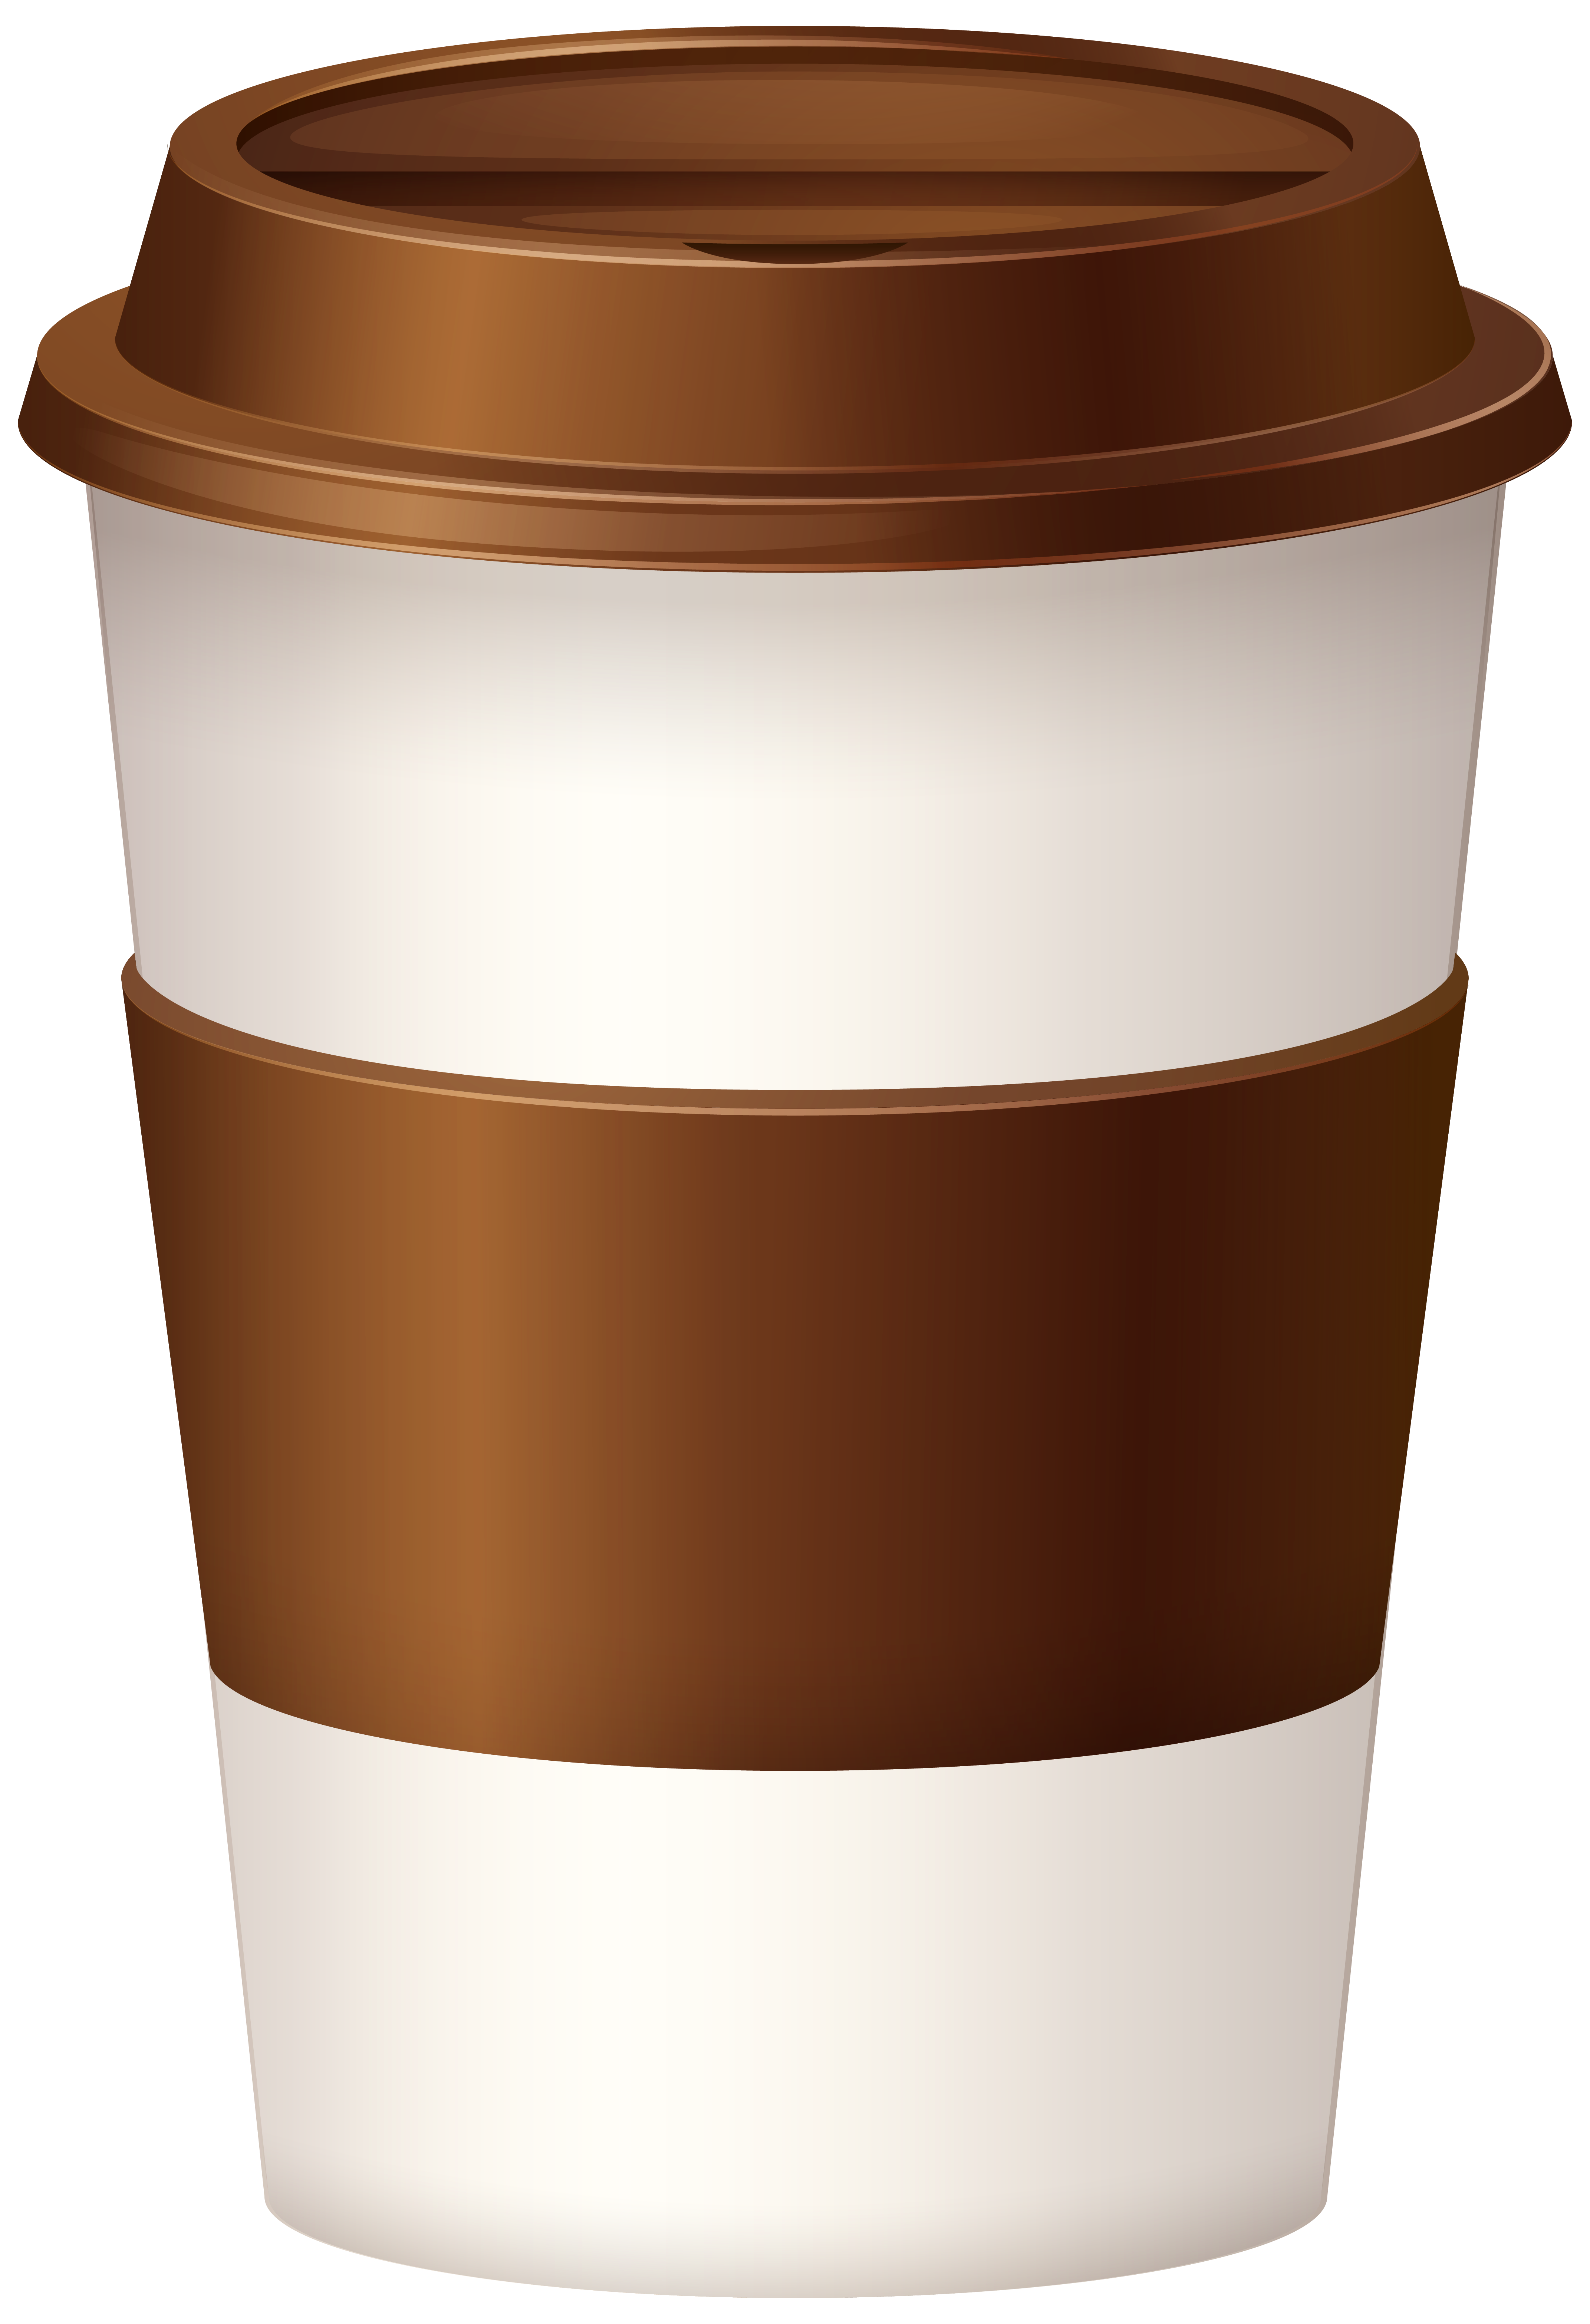 Hot coffee cup clipart image